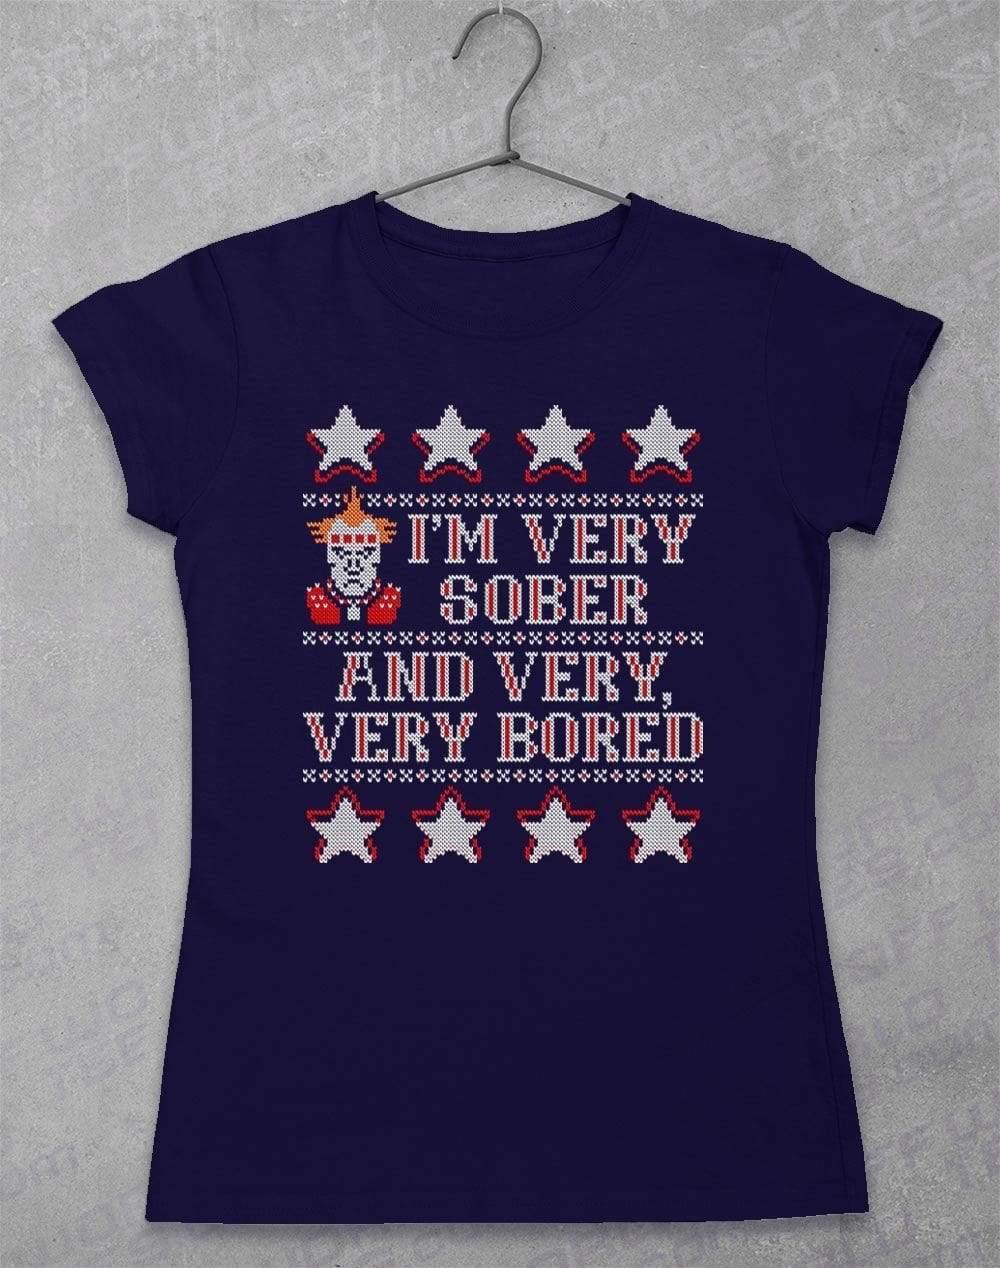 I'm Very Sober and Very Very Bored Festive Knitted-Look Women's T-Shirt 8-10 / Navy  - Off World Tees